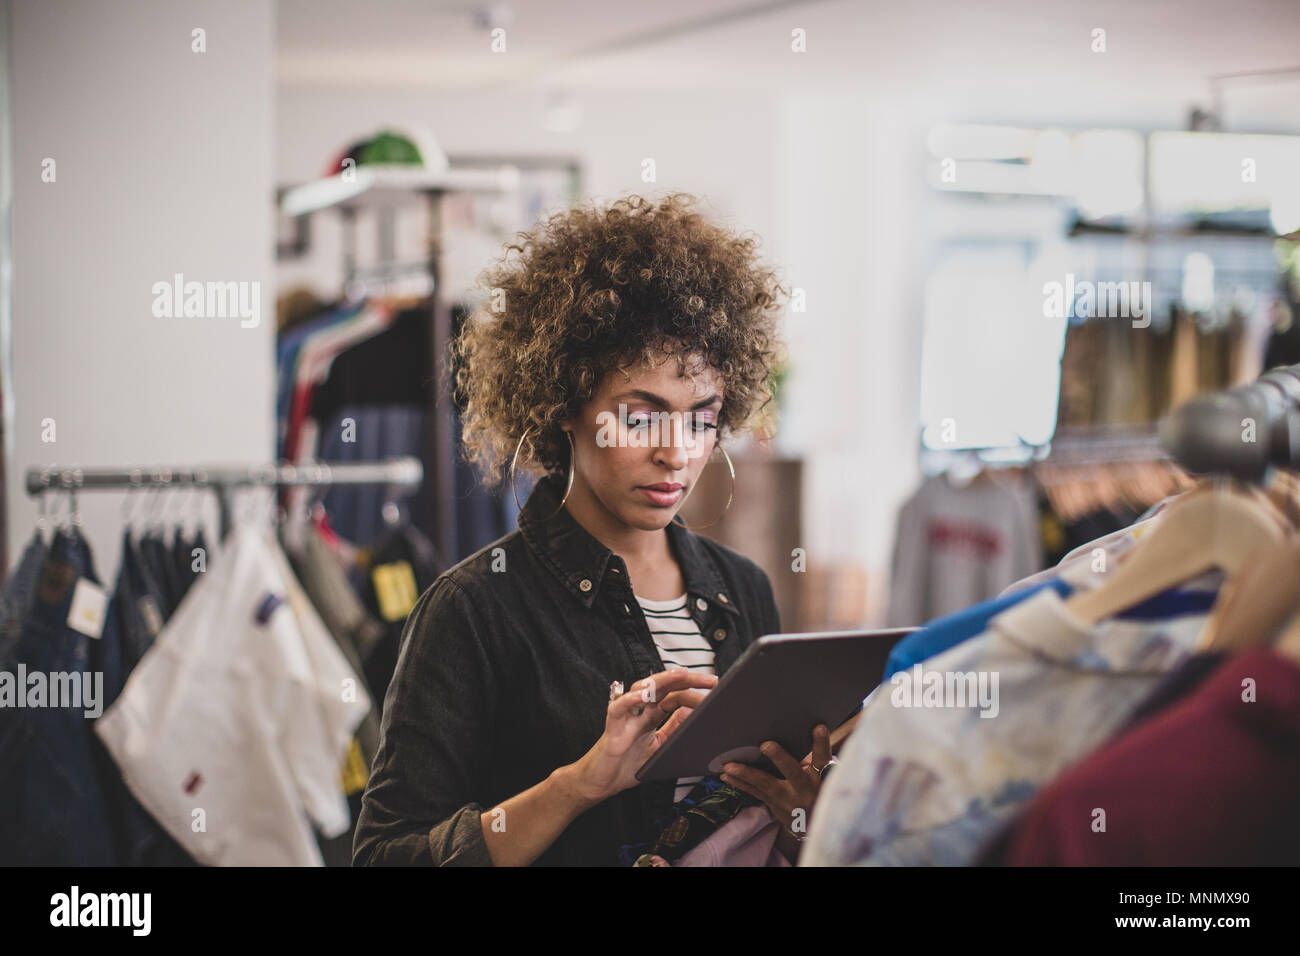 Store manager using digital tablet in a clothing store Banque D'Images